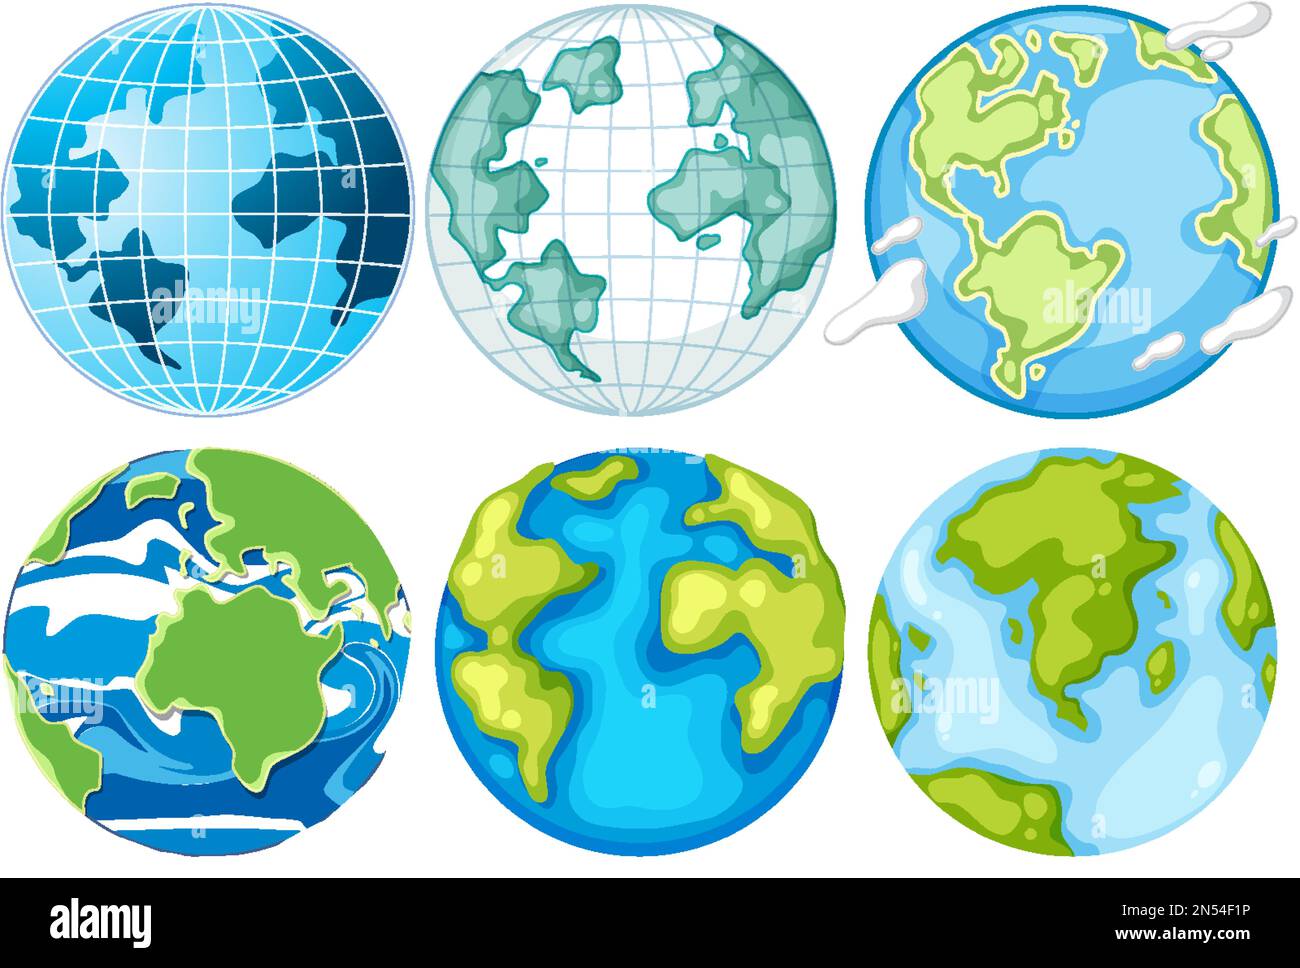 Set of earth globes isolated illustration Stock Vector